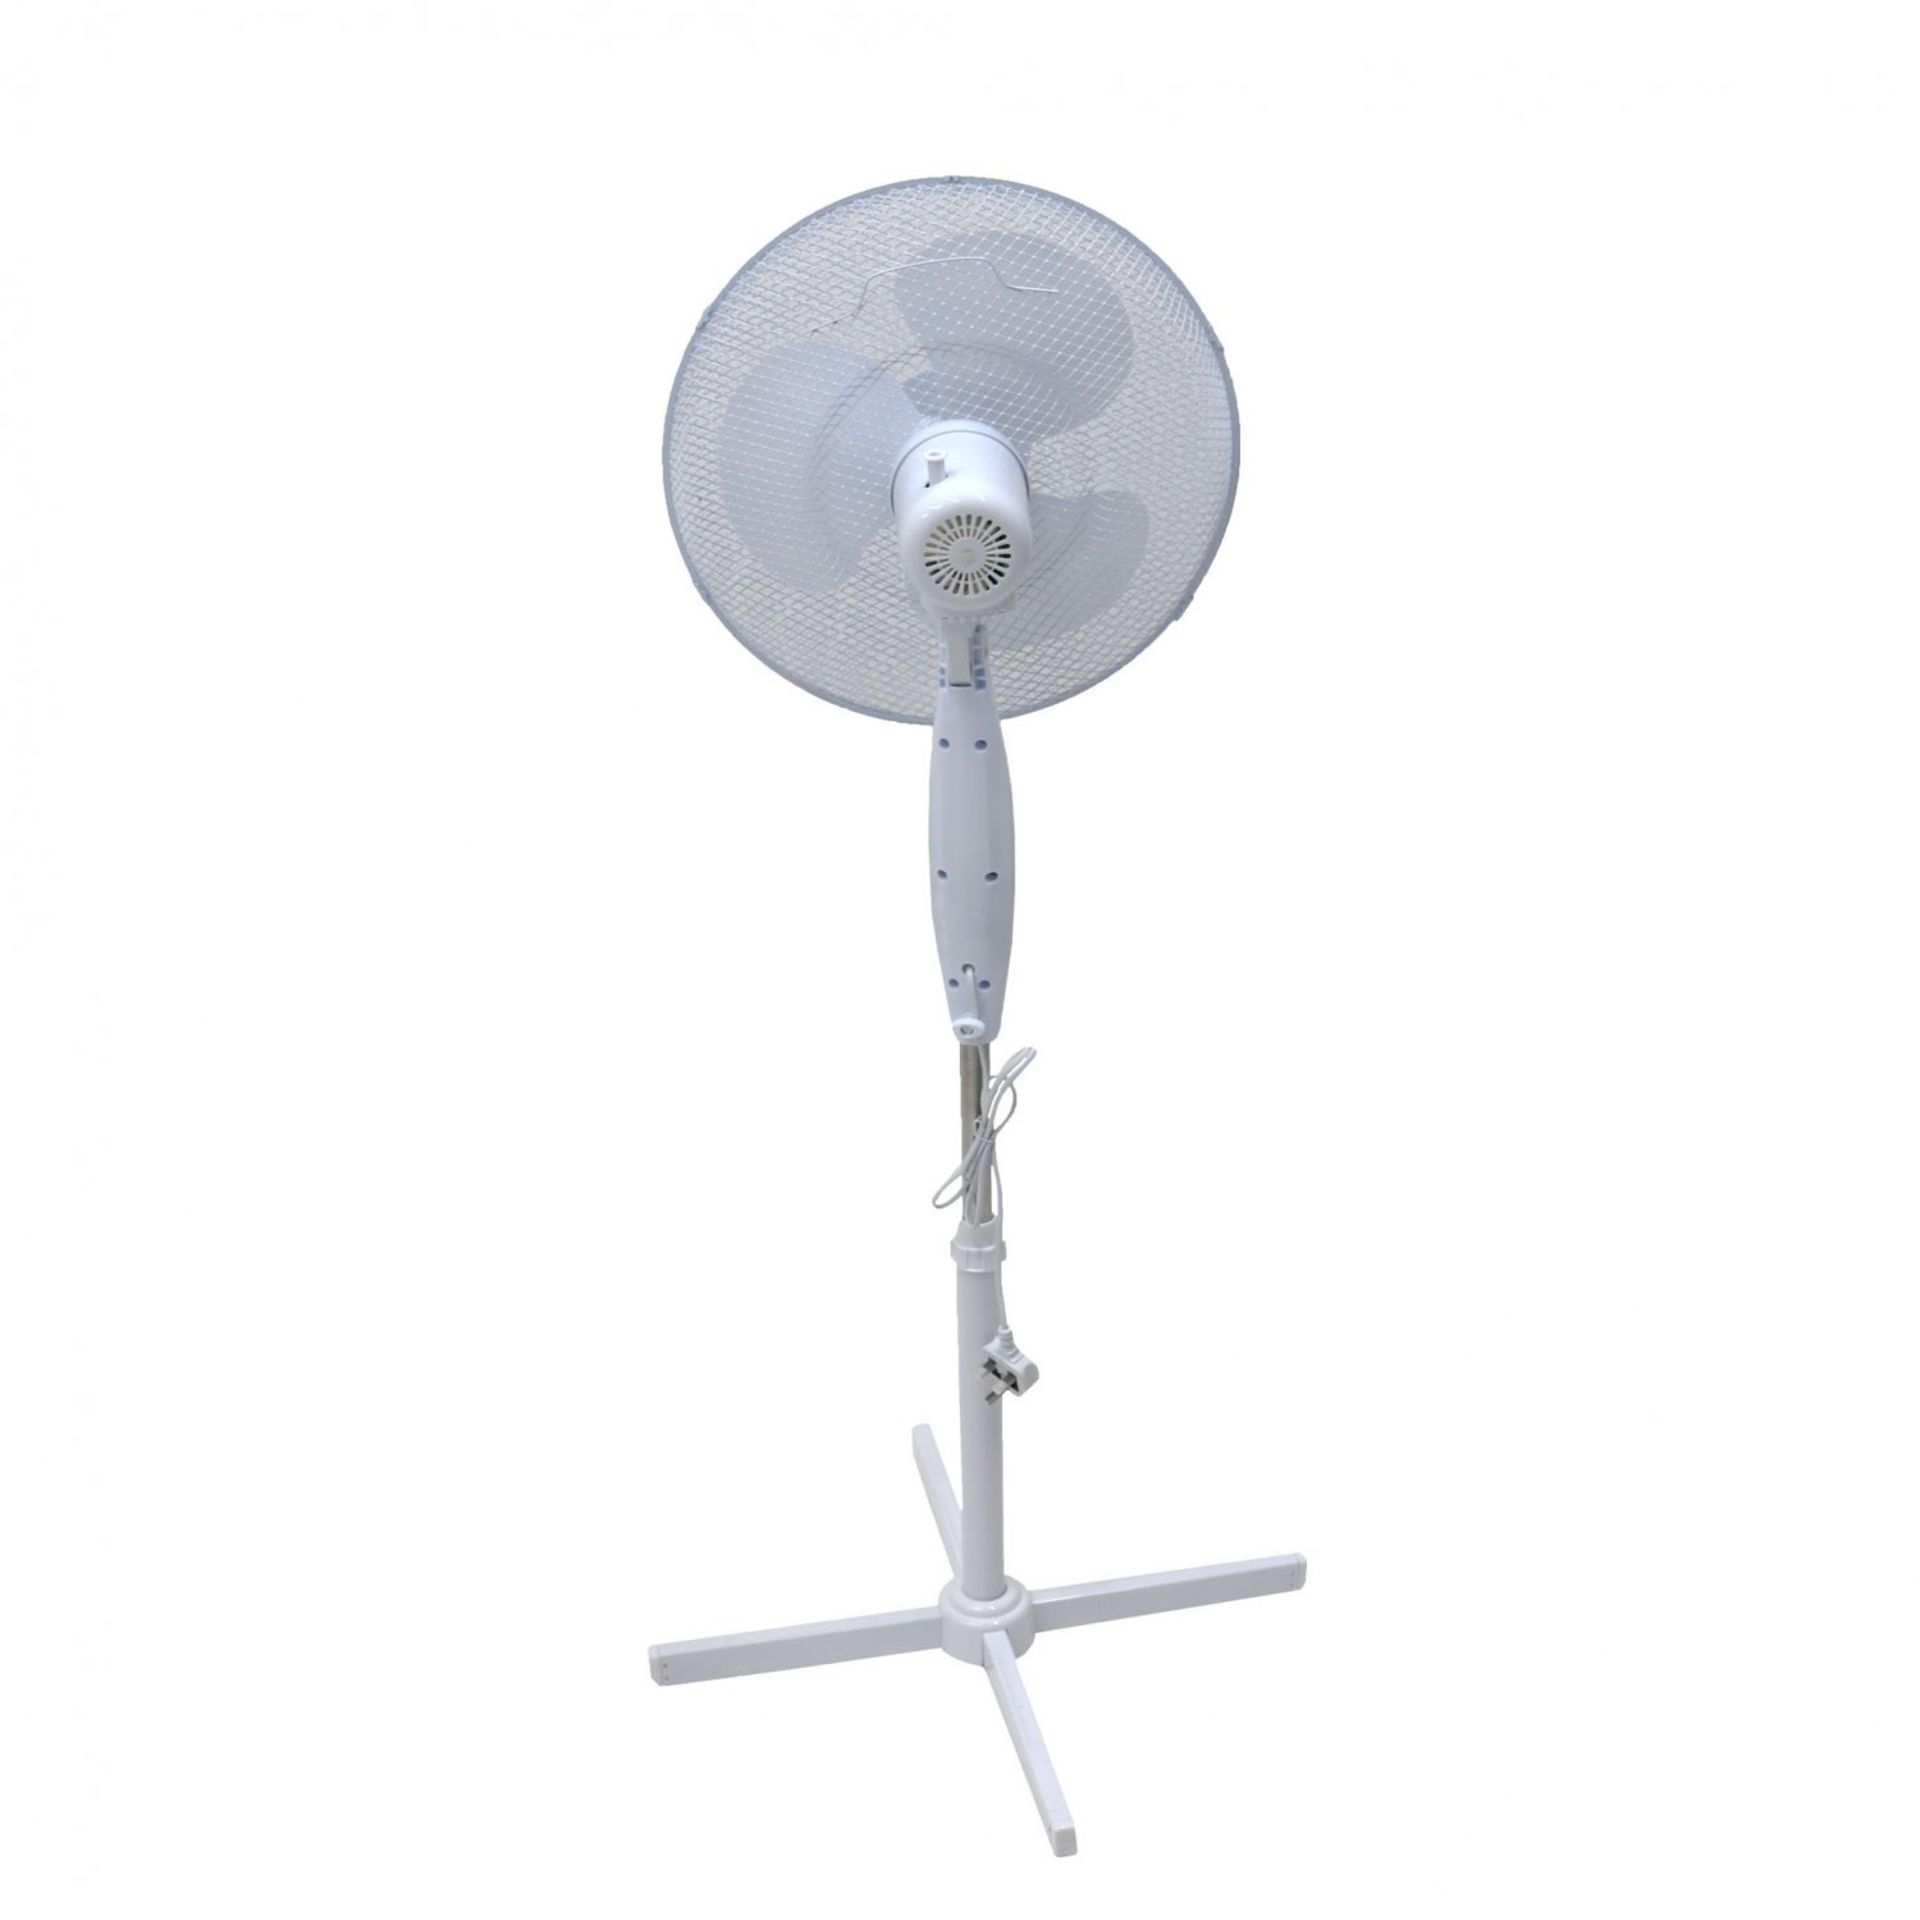 (RU343) 16" Oscillating Pedestal Electric Fan The fan head oscillates and tilts wh... - Image 2 of 2